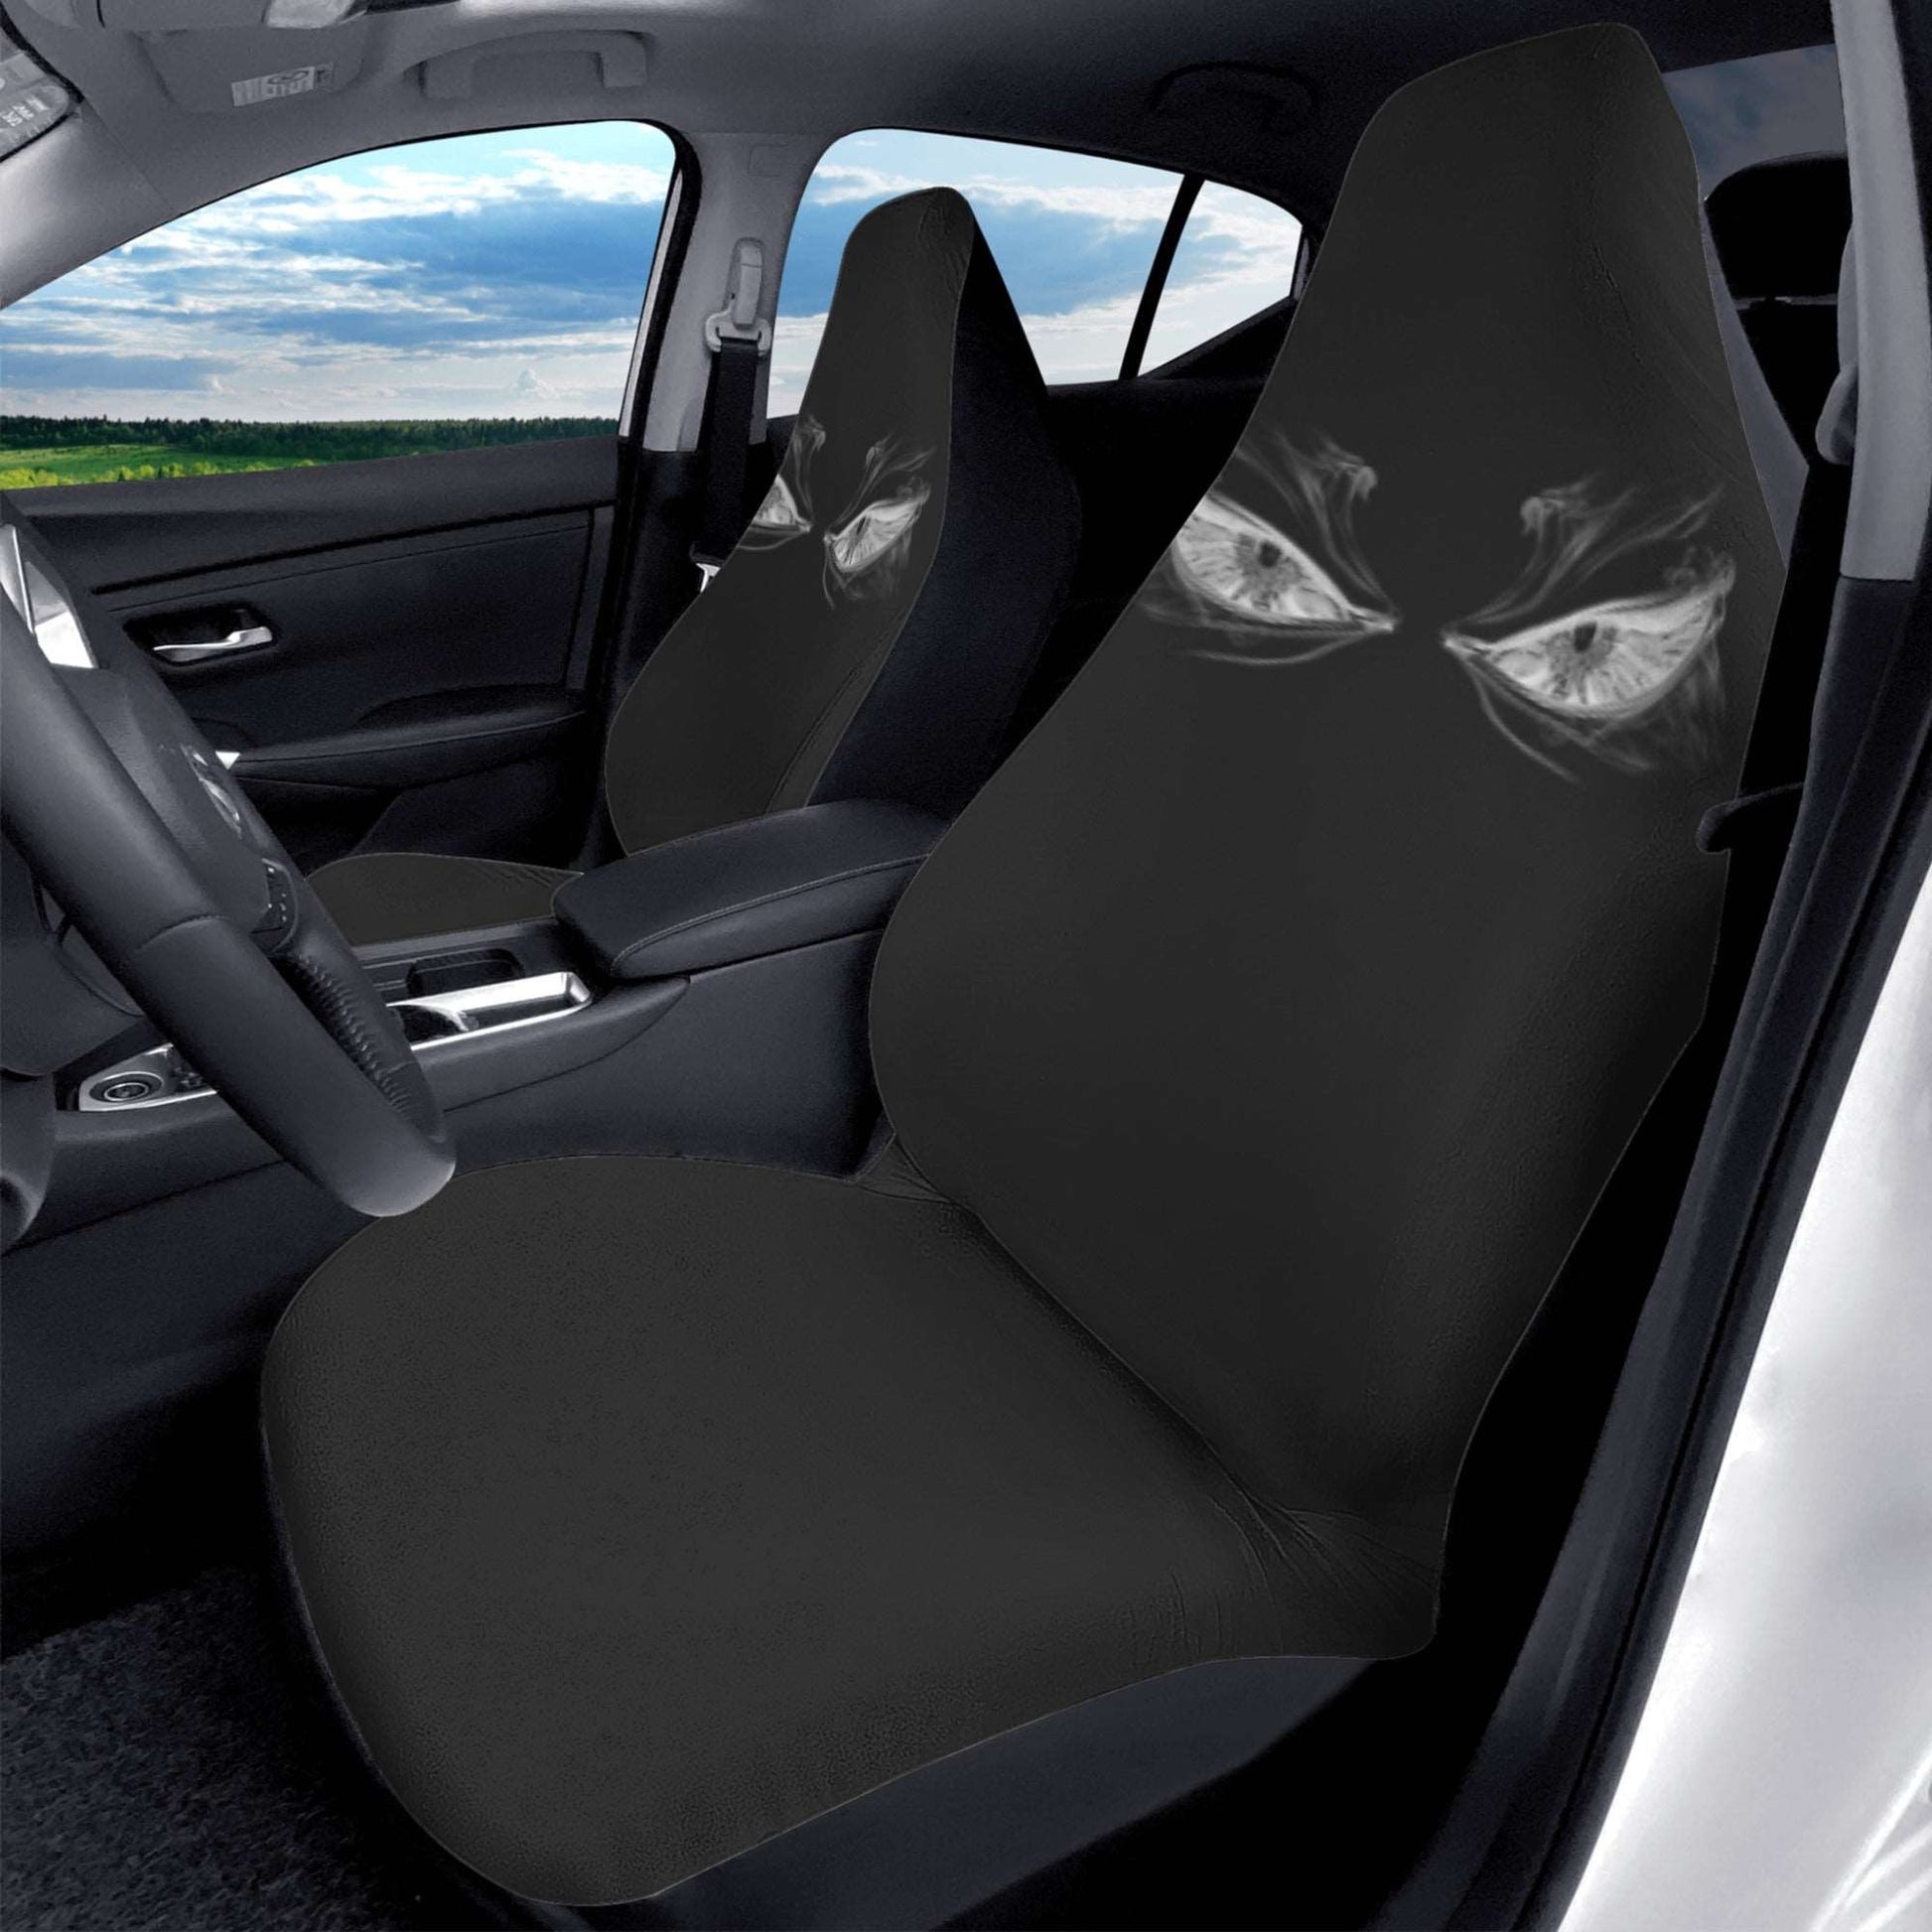 Angry Eyes 2PC Car Seat Covers